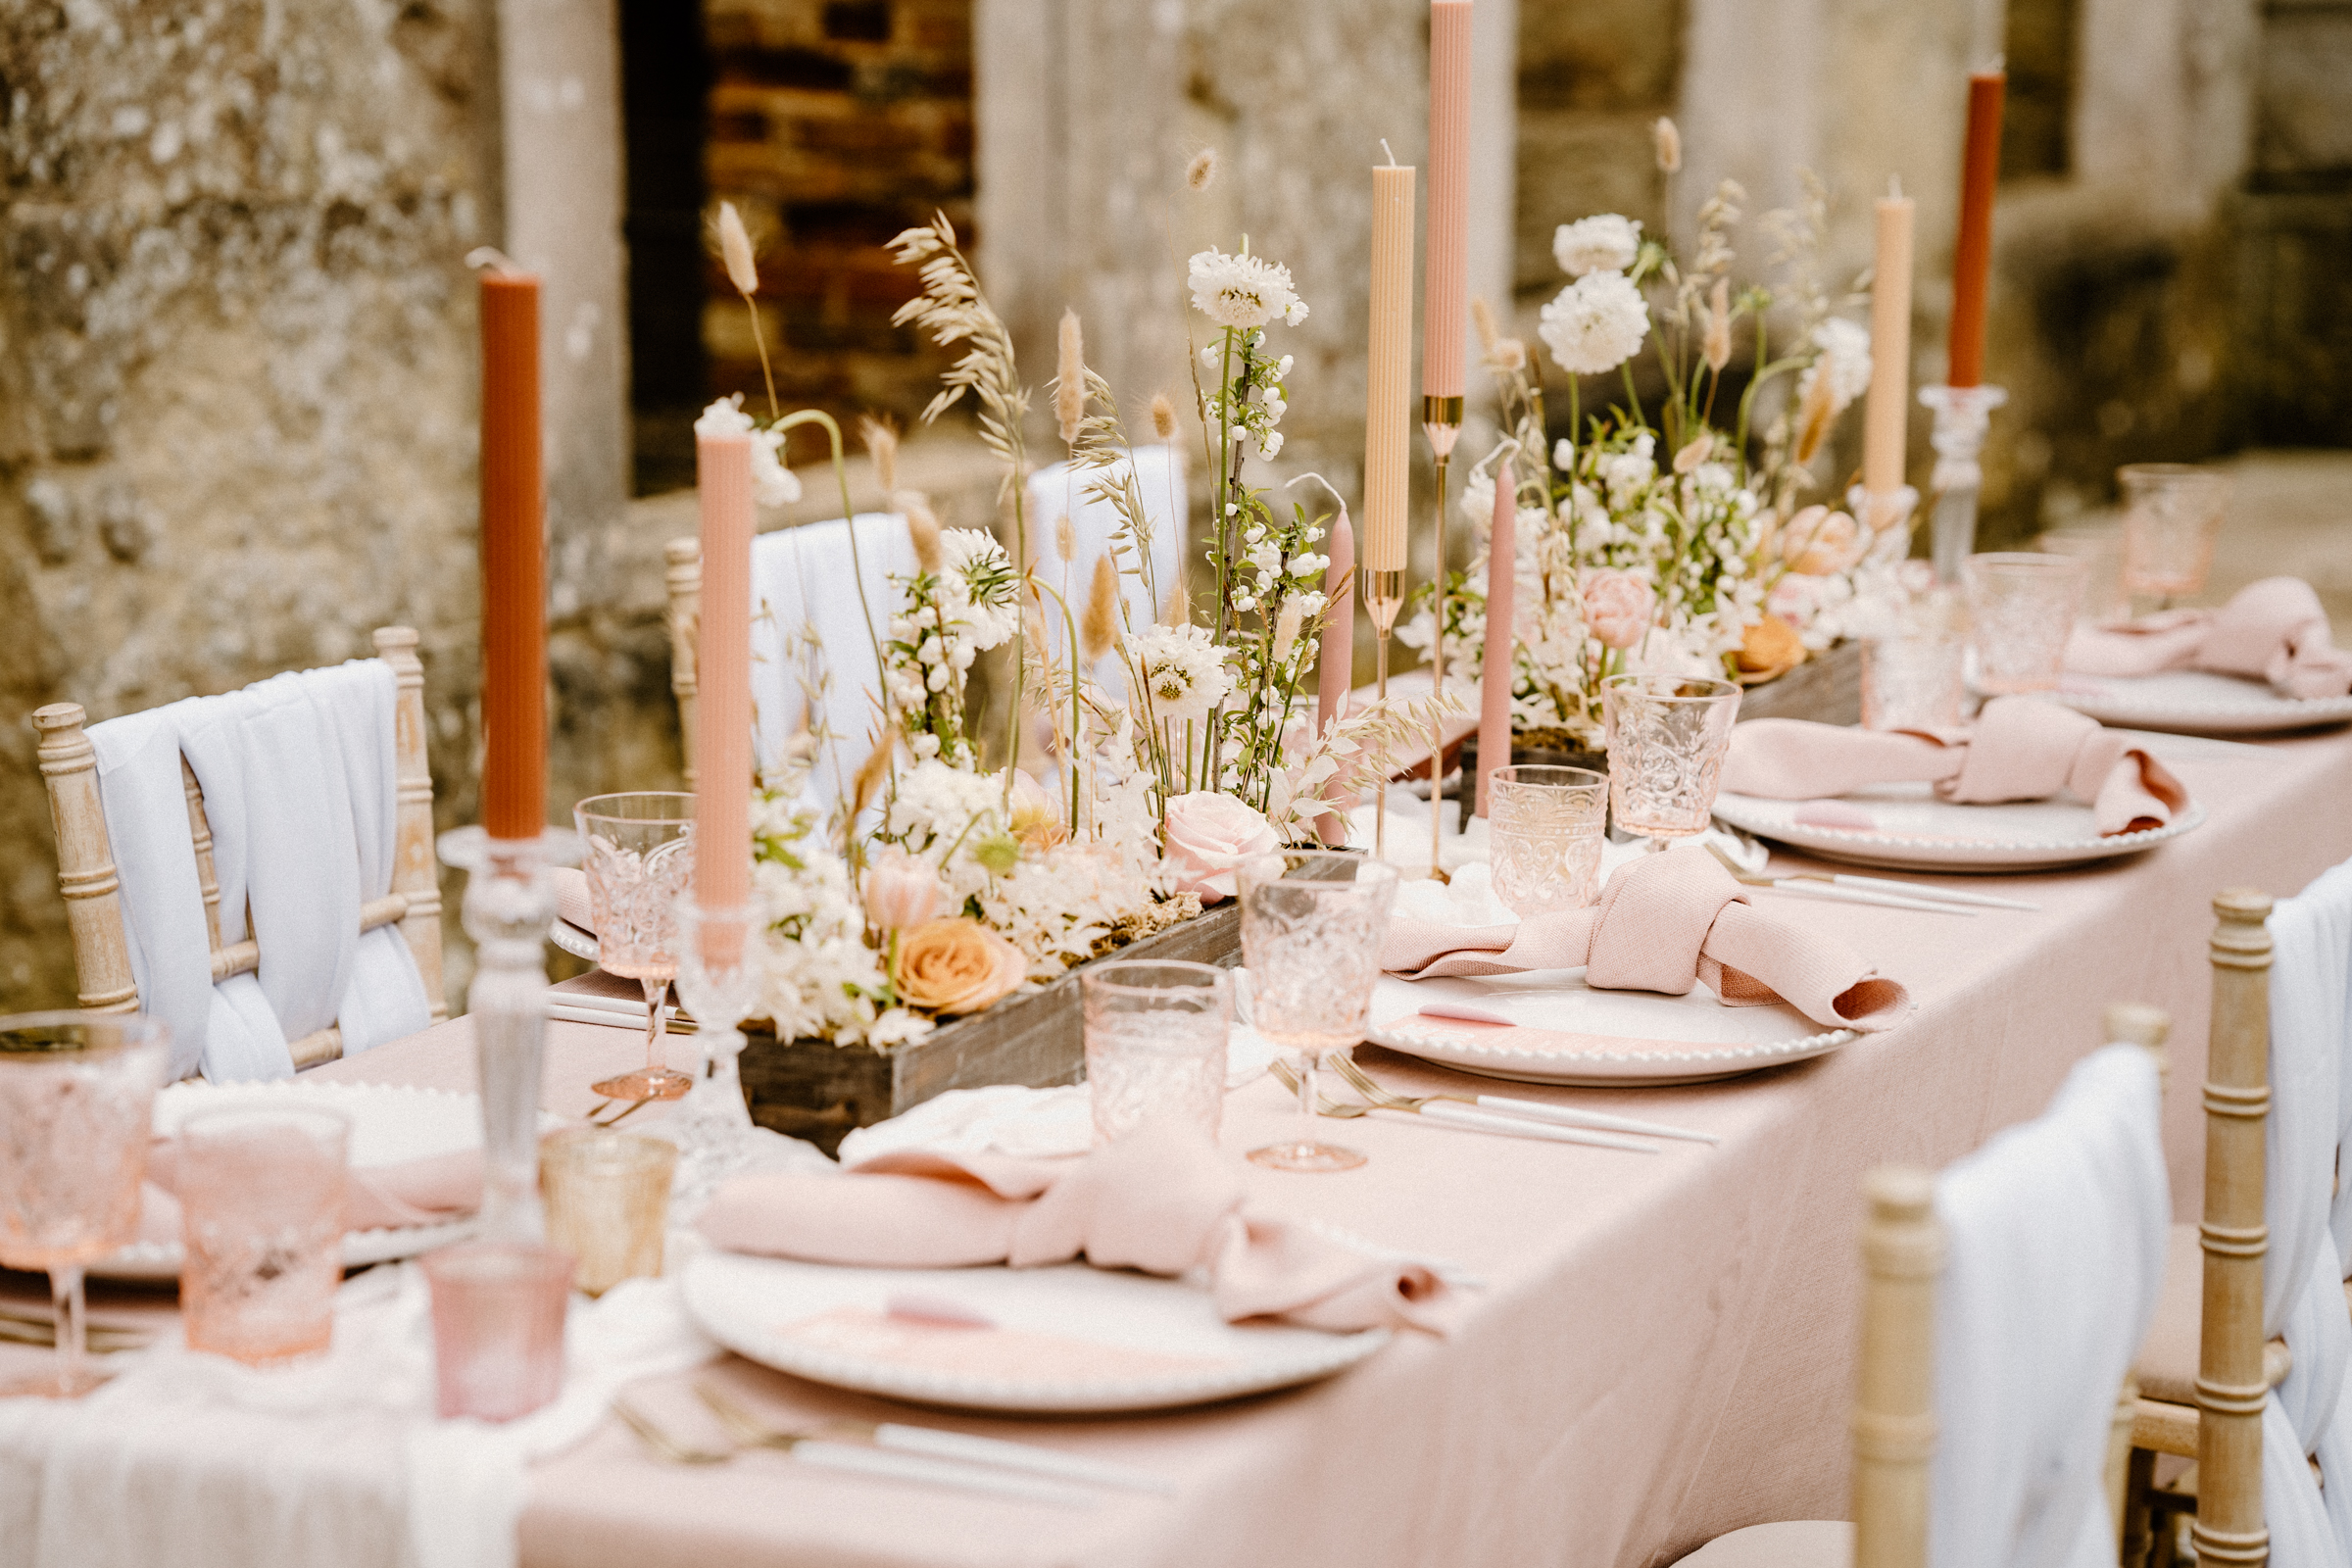 Wedding Decor: 5 Top Tips for Wedding Table Styling That Wows